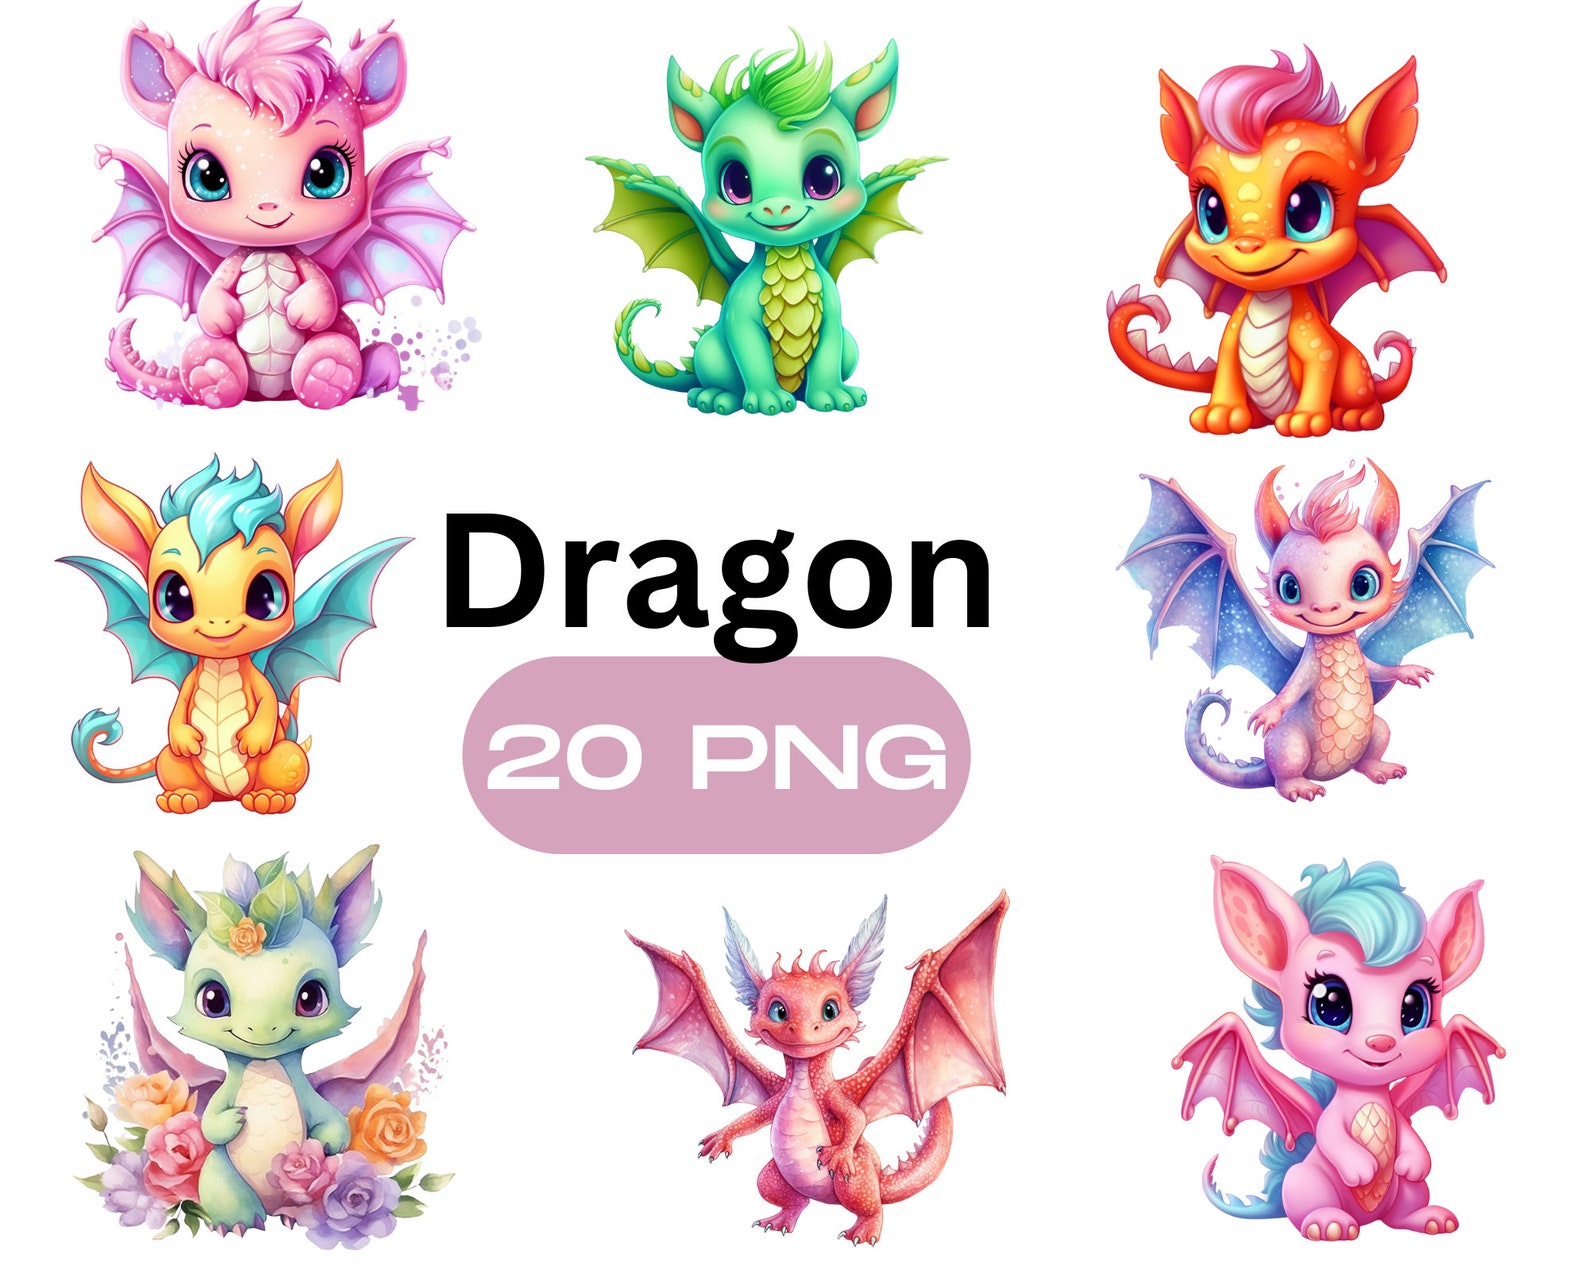 Colorful Baby Dragon Clipart, Dragon Clipart, PNG Digital, Paper Crafts ...